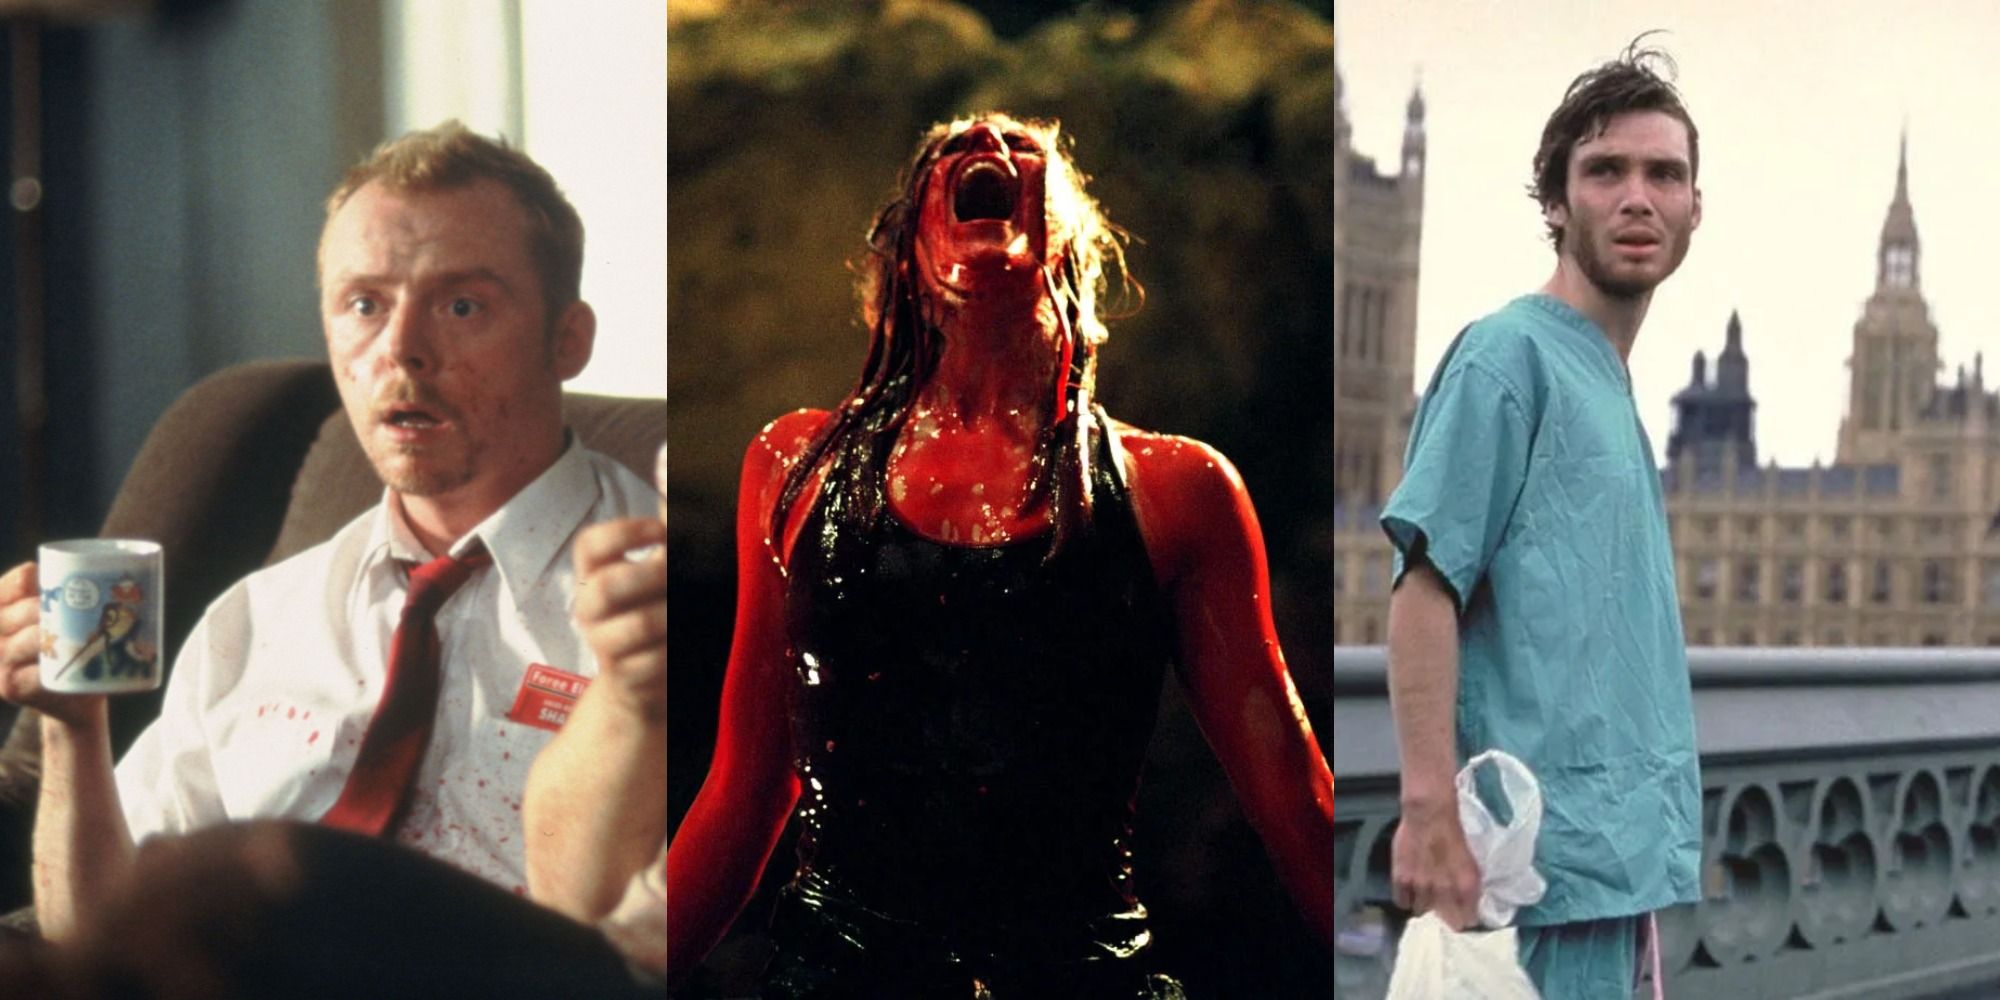 Shaun of the Dead, The Descent, and 28 Days Later